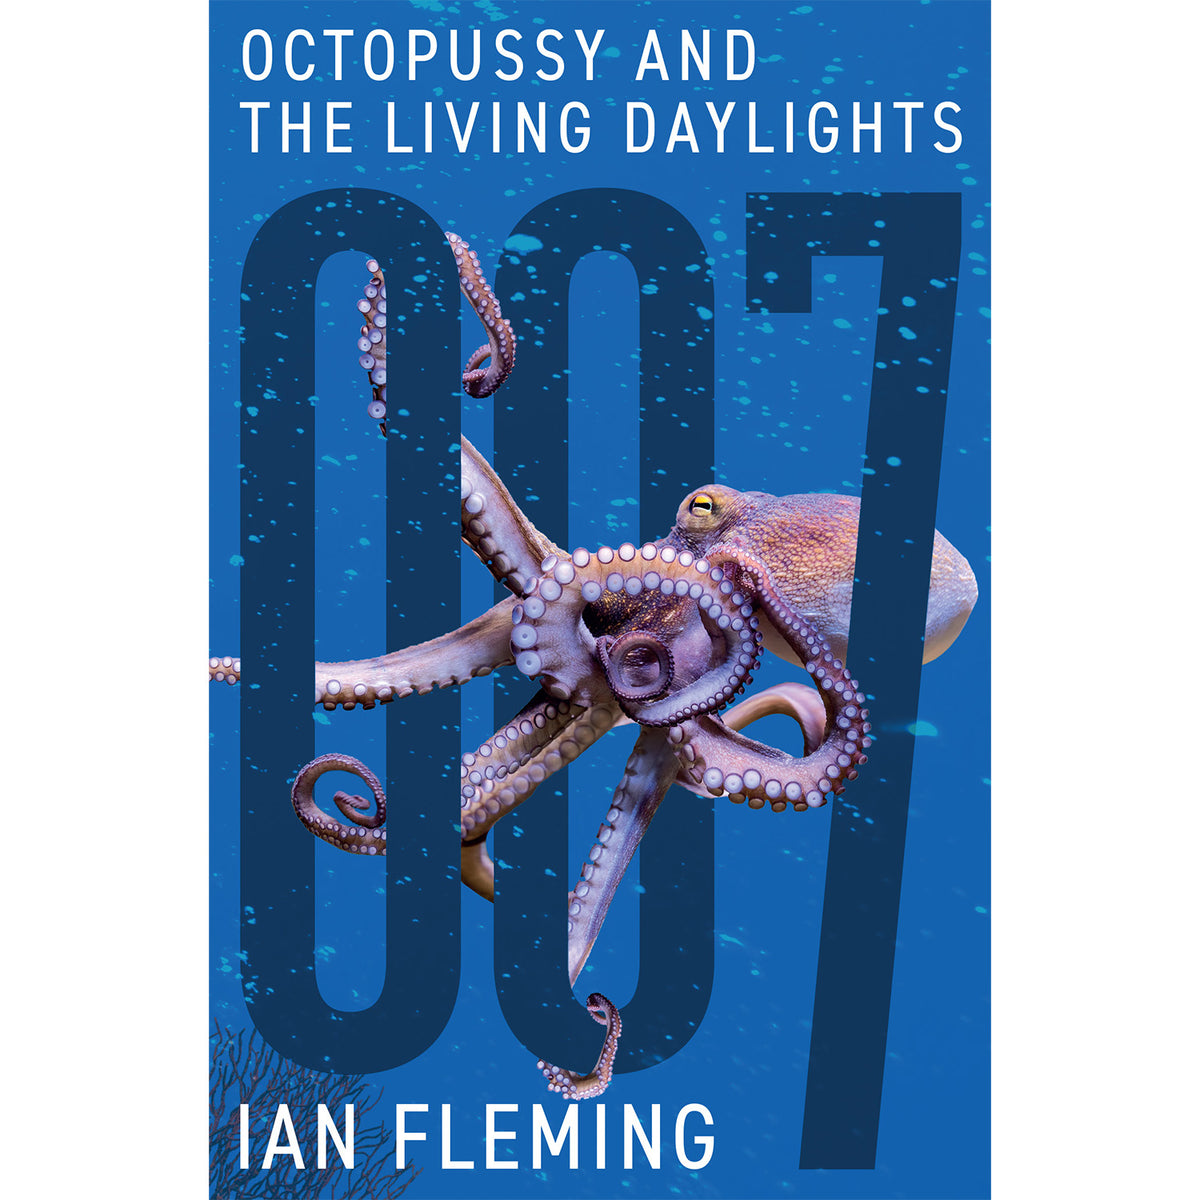 James Bond Octopussy and The Living Daylights Book - By Ian Fleming